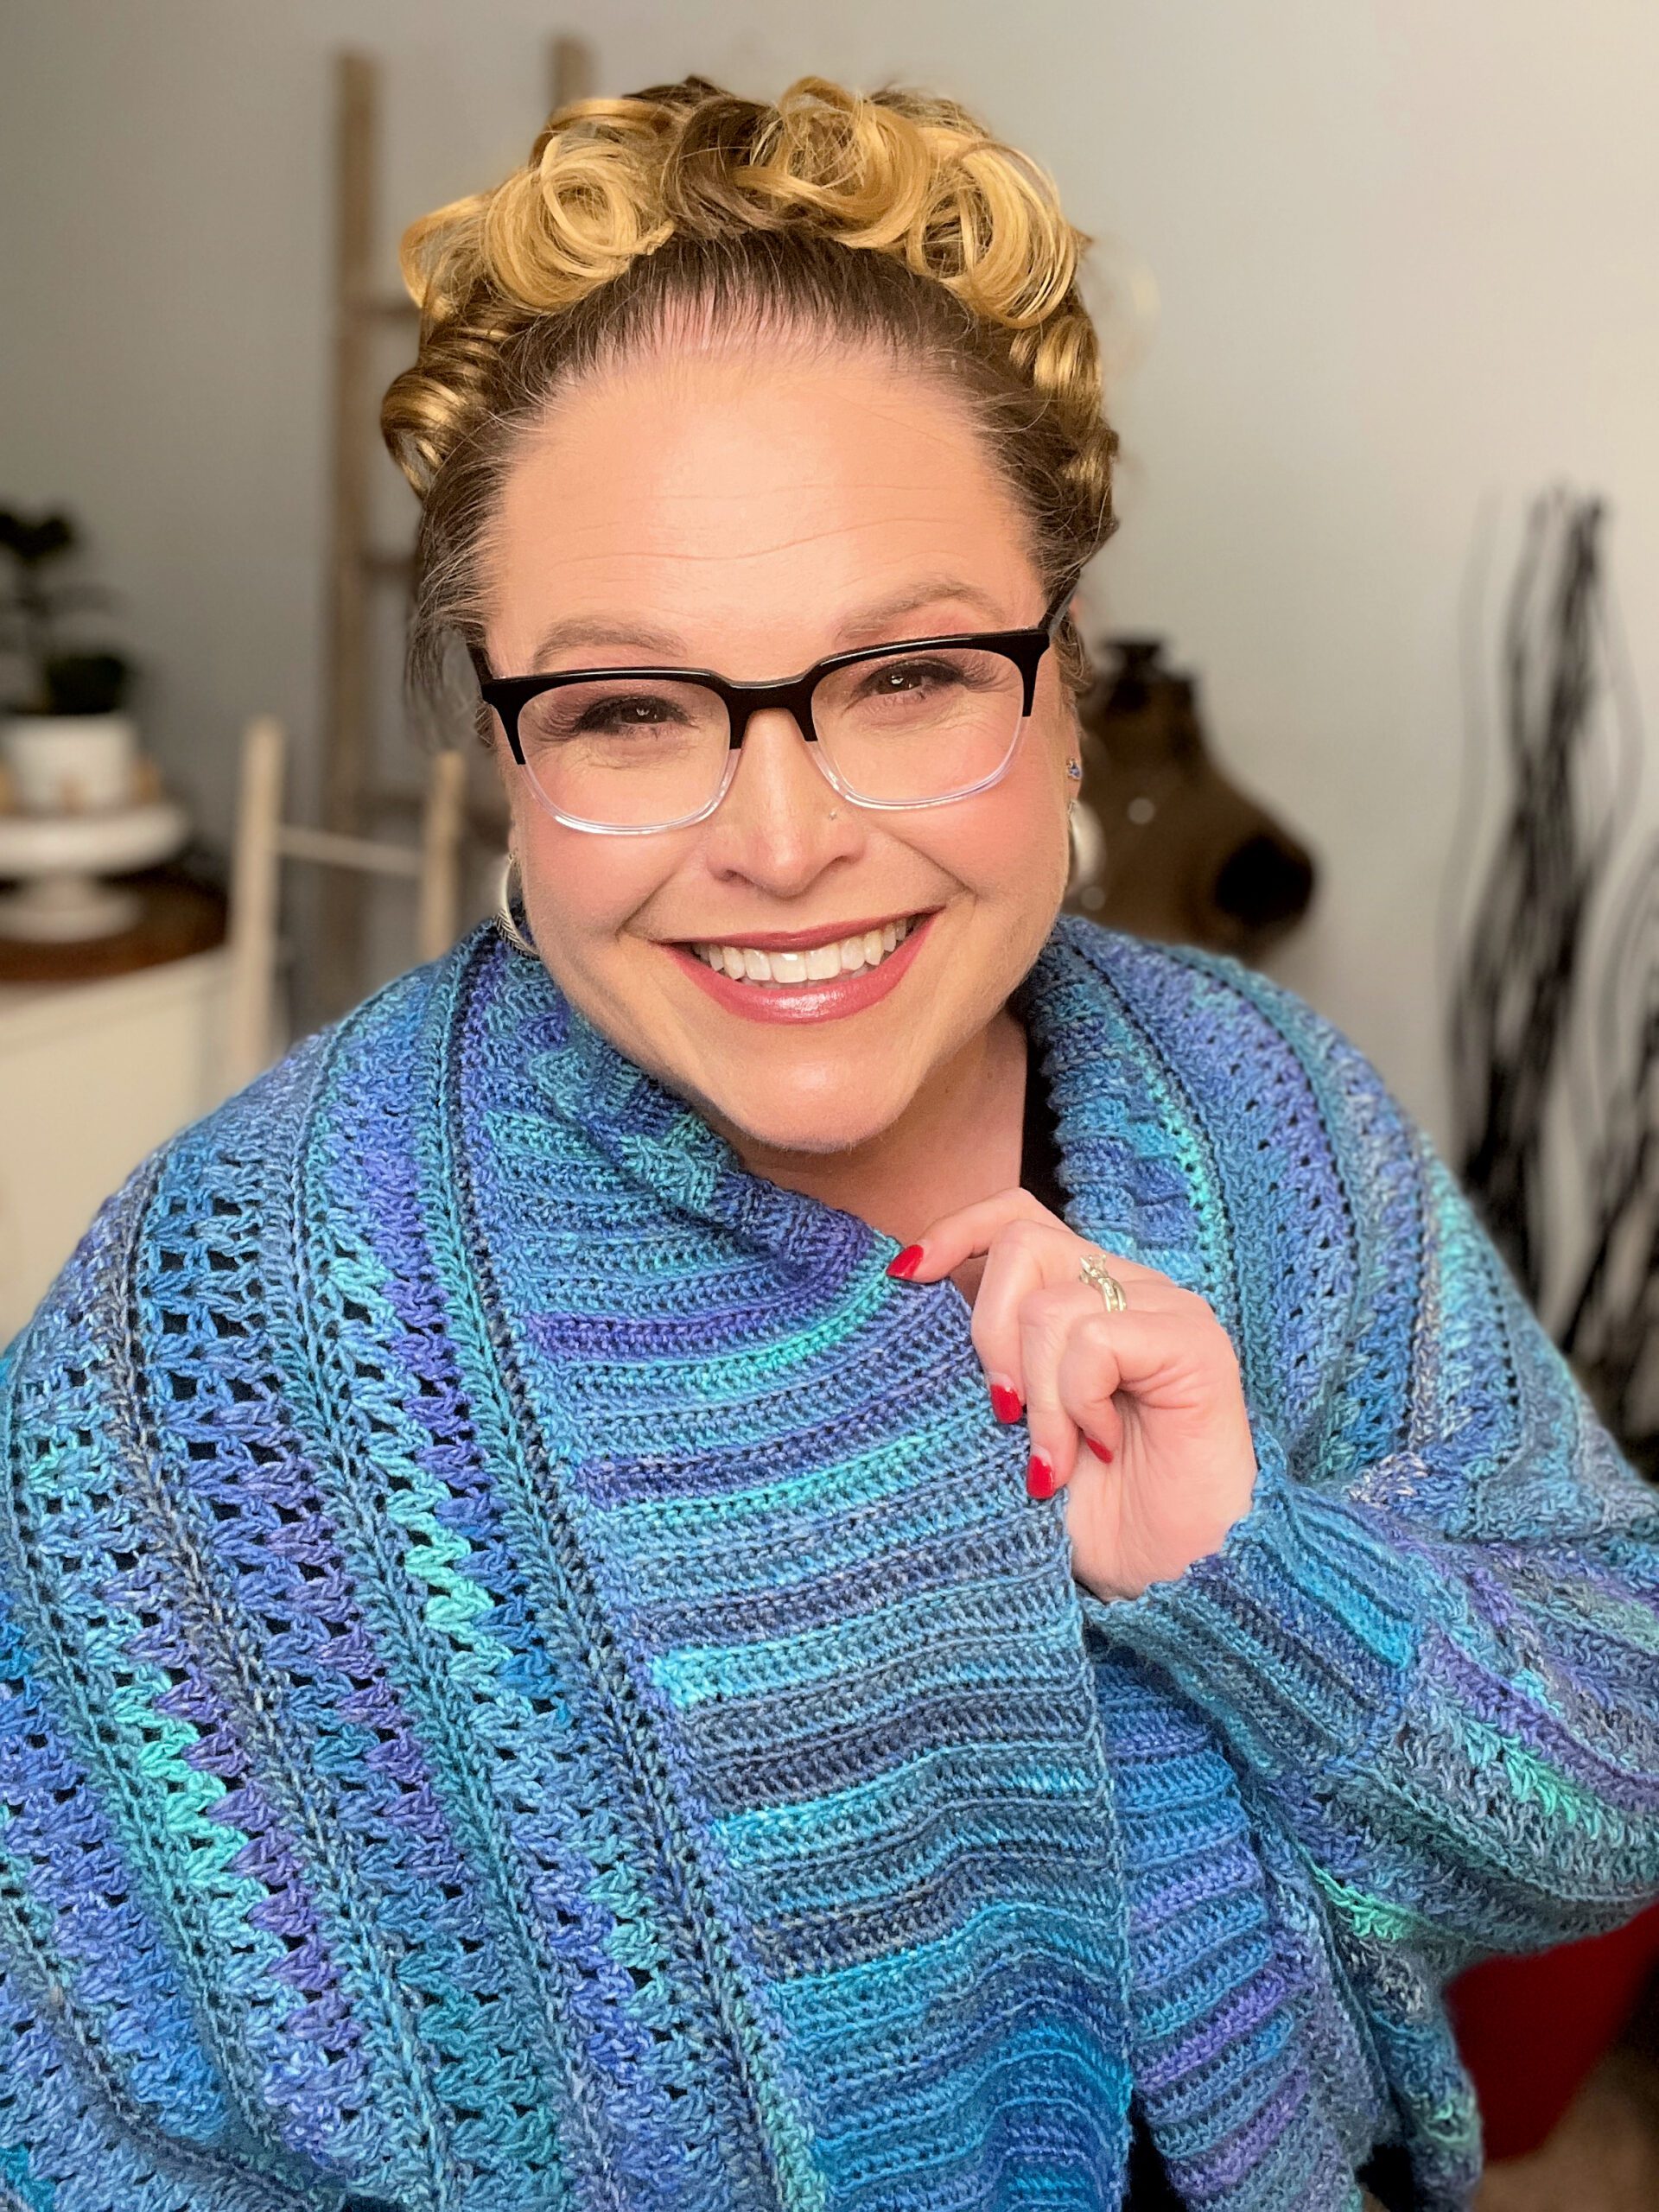 A smiling woman with curly blonde hair, wearing glasses and a colorful oversized crocheted sweater, posing indoors with a soft focus background. You Are Valued Crochet Cocoon Cardigan pattern by Marly Bird